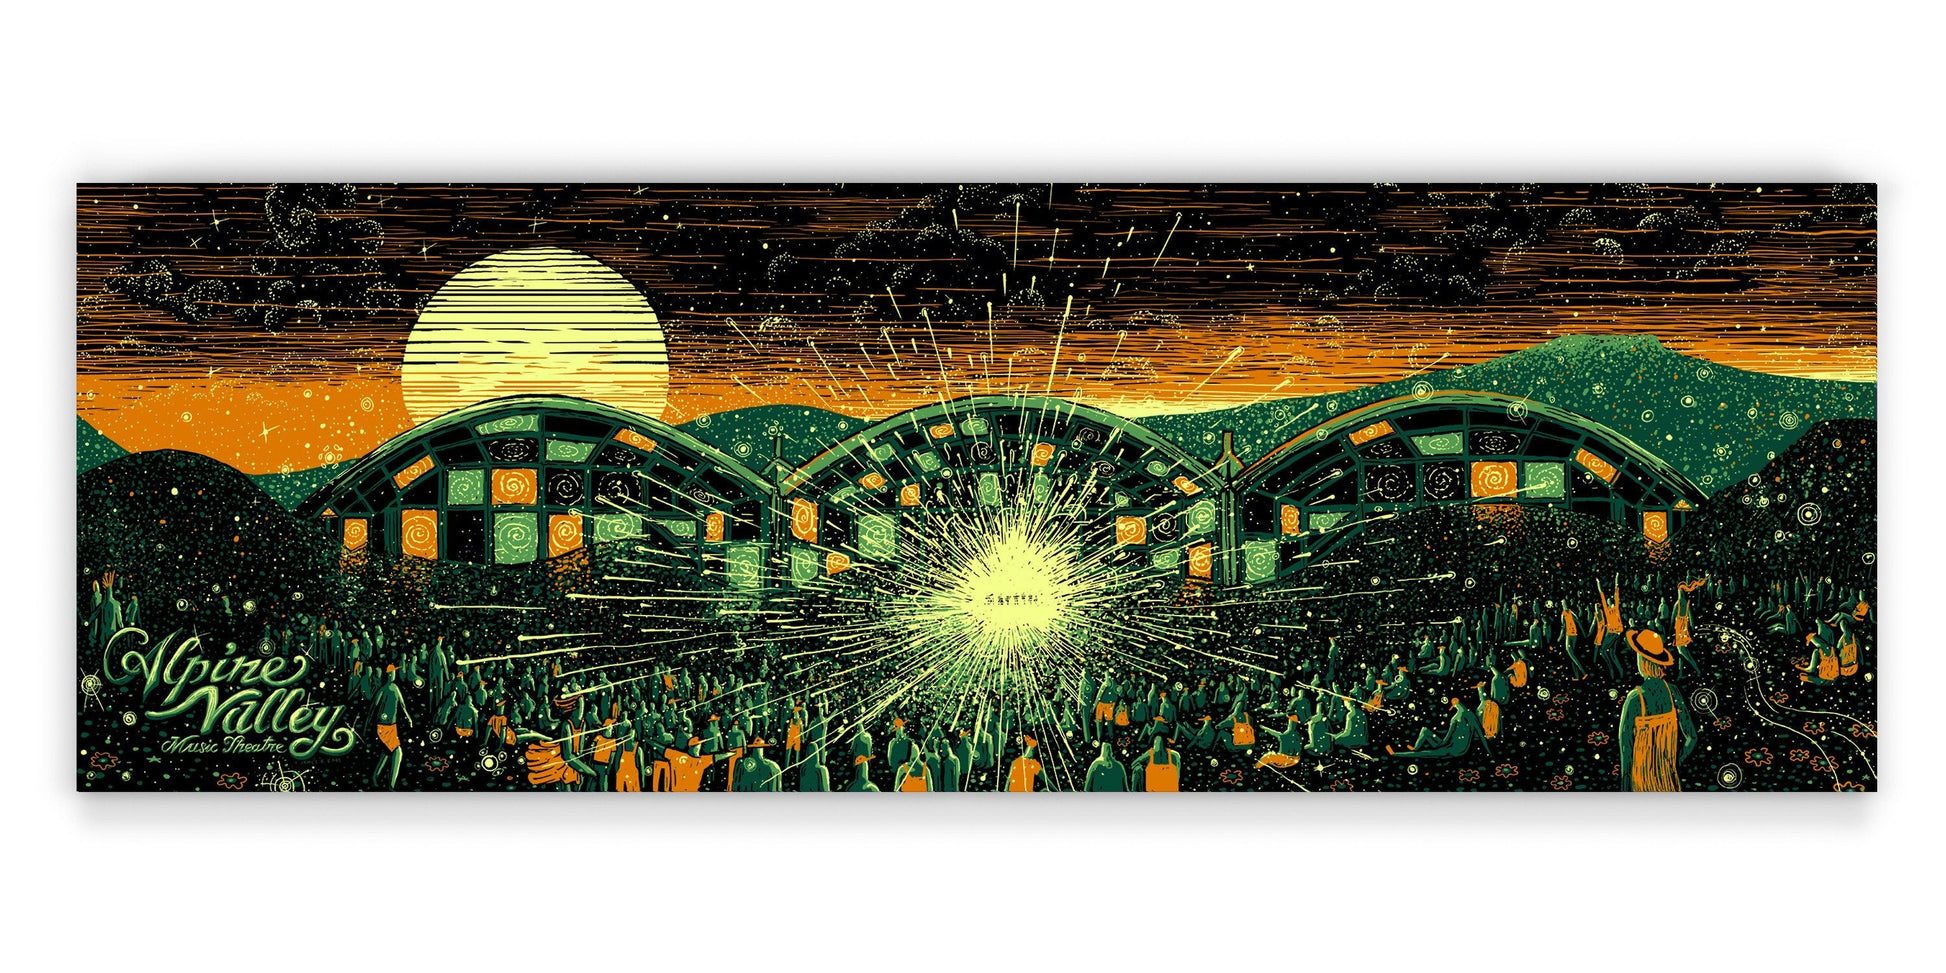 Alpine Valley Day (Limited Edition of 250) Print James R. Eads